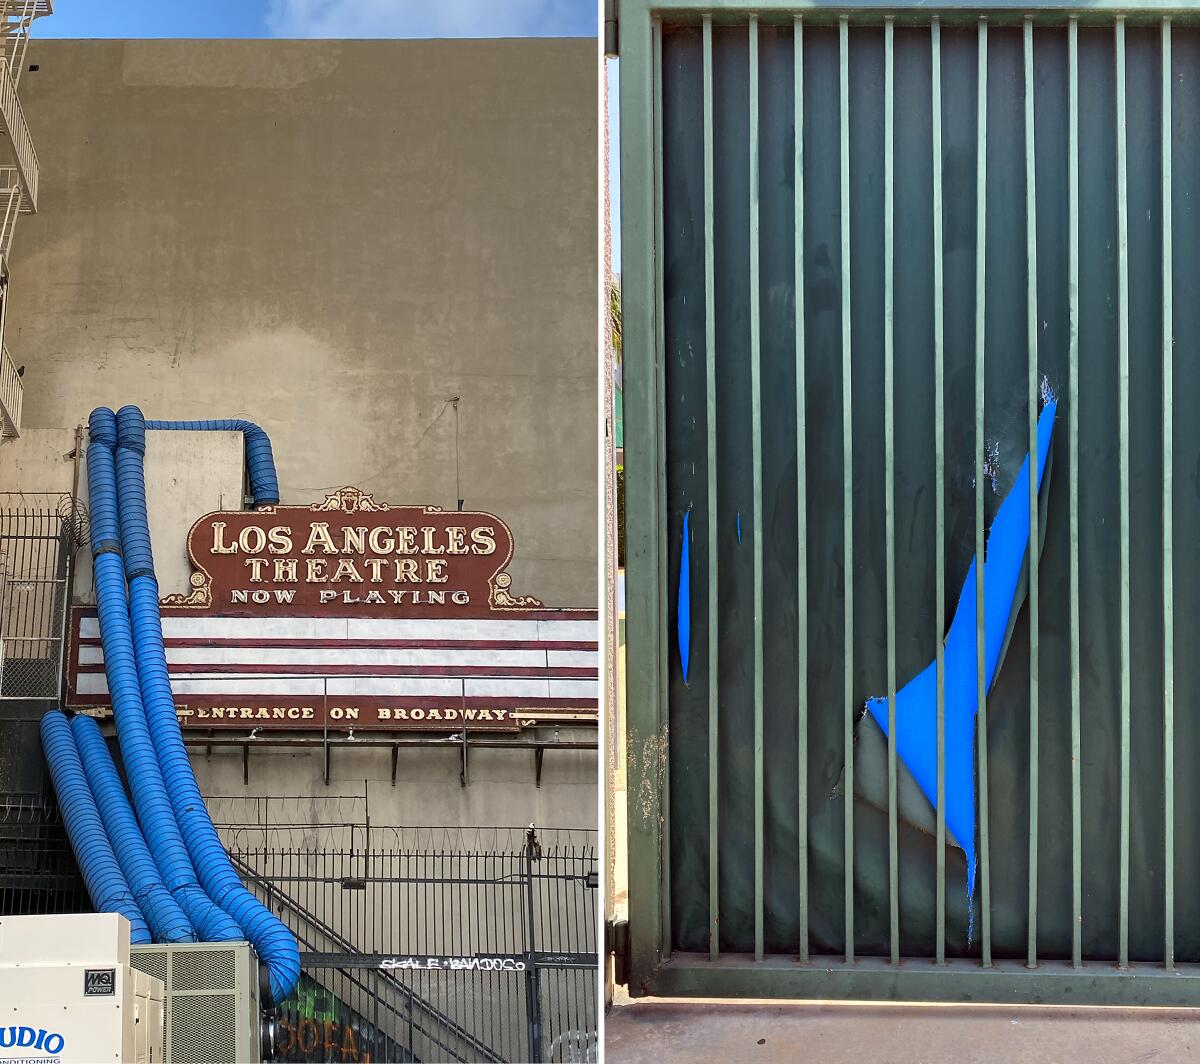 Paired images show an L.A. Theatre sign surrounded by blue ventilation tubing and a boarded window with torn blue paper